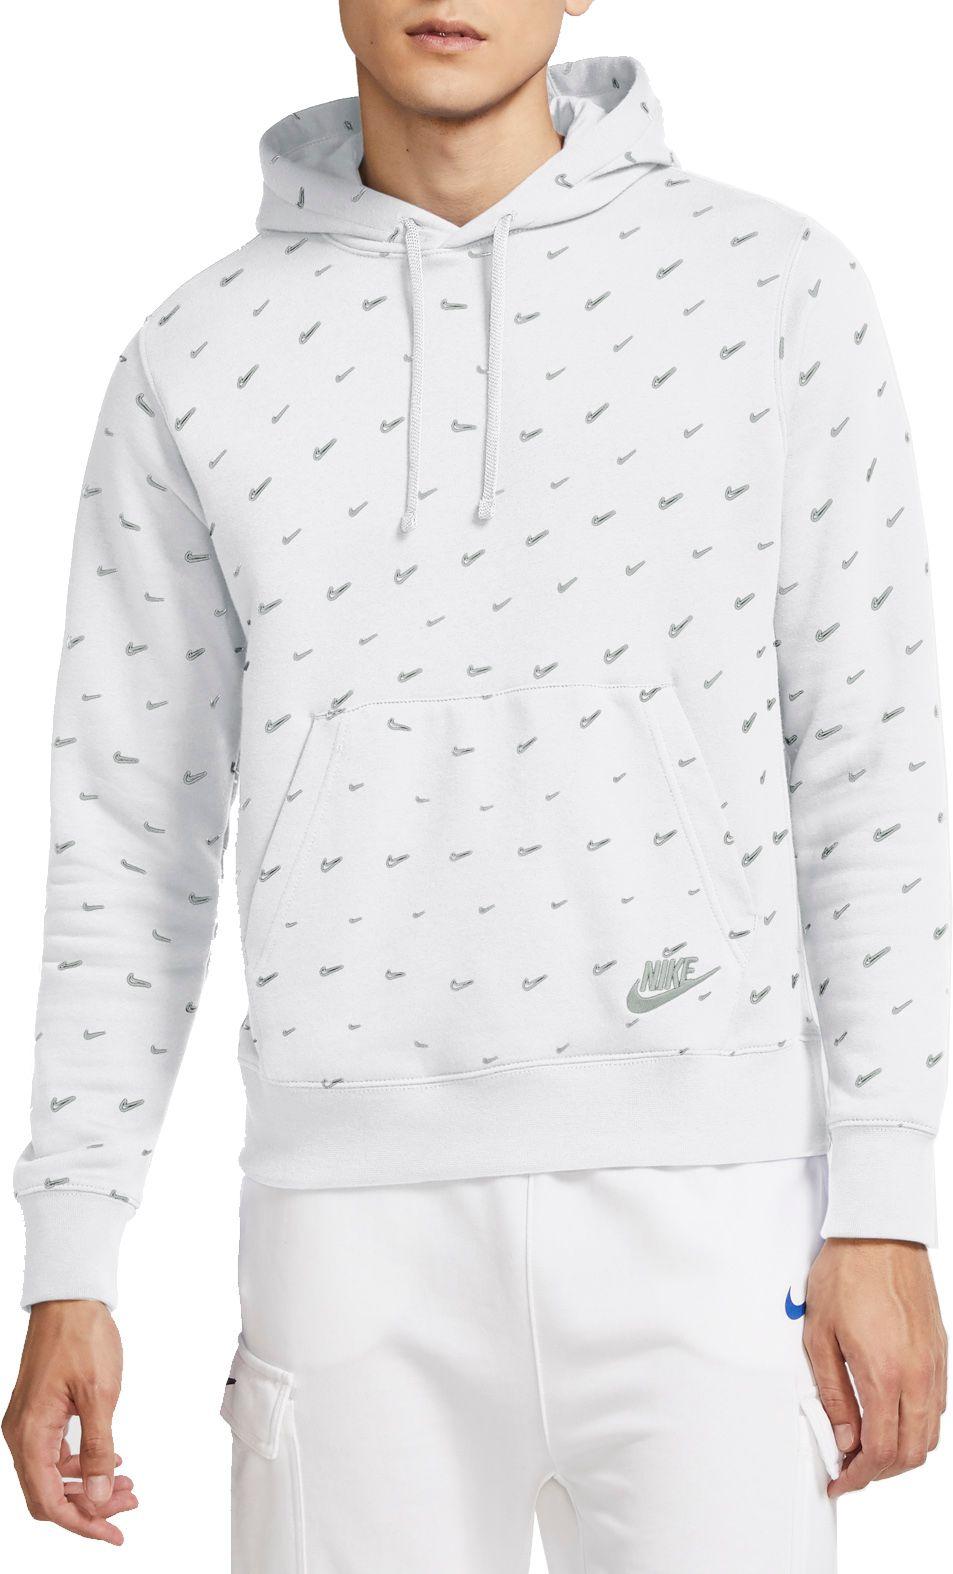 Nike Cotton Swoosh Pullover Hoodie in White/Black (White) for Men - Lyst